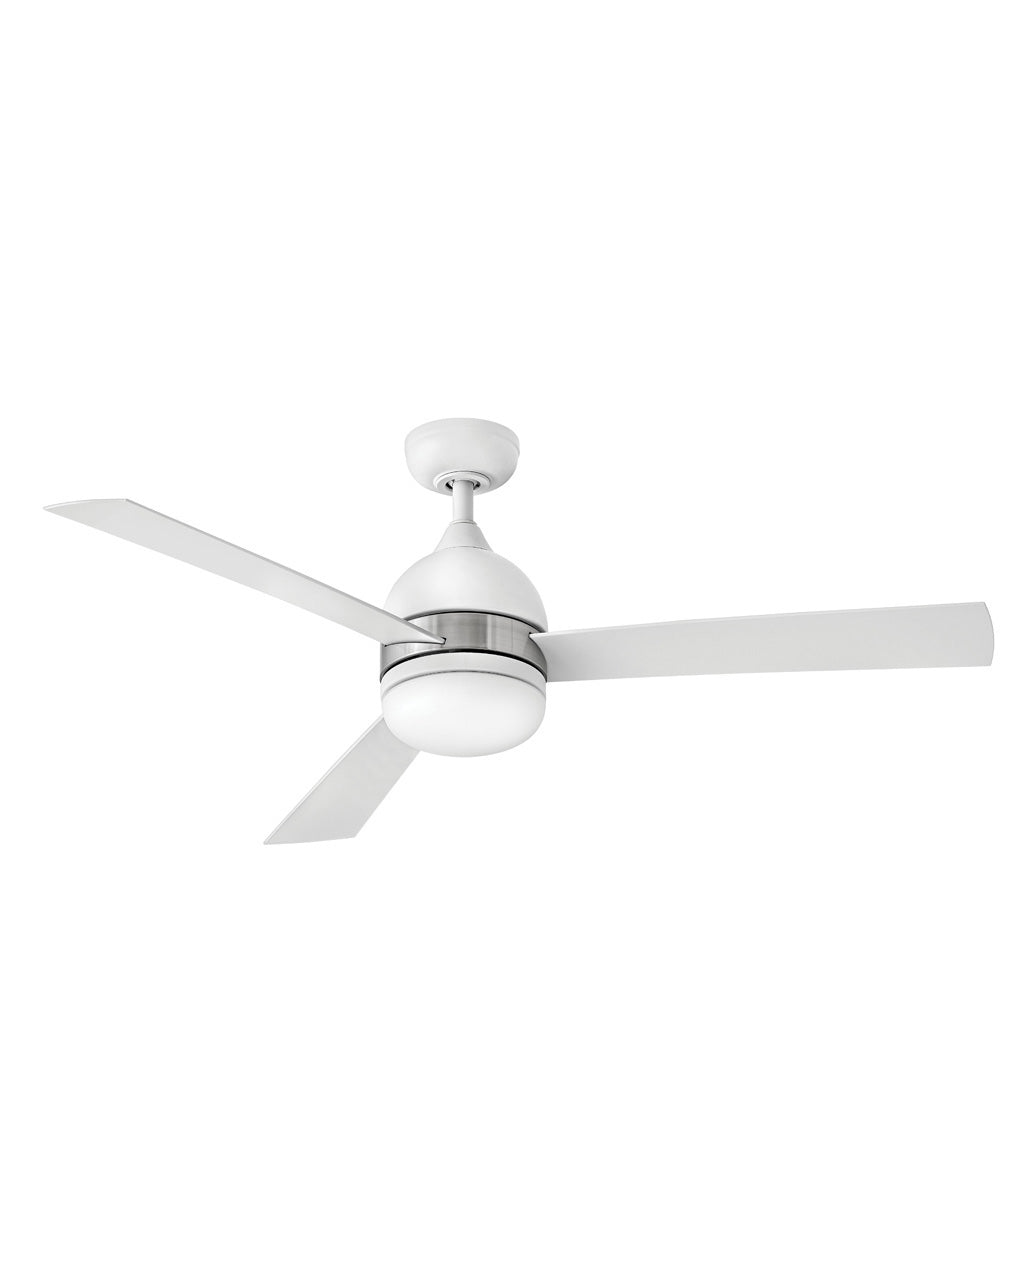 Hinkley Verge 52" LED 902352 Ceiling Fan Hinkley Matte White with Brushed Nickel accent  